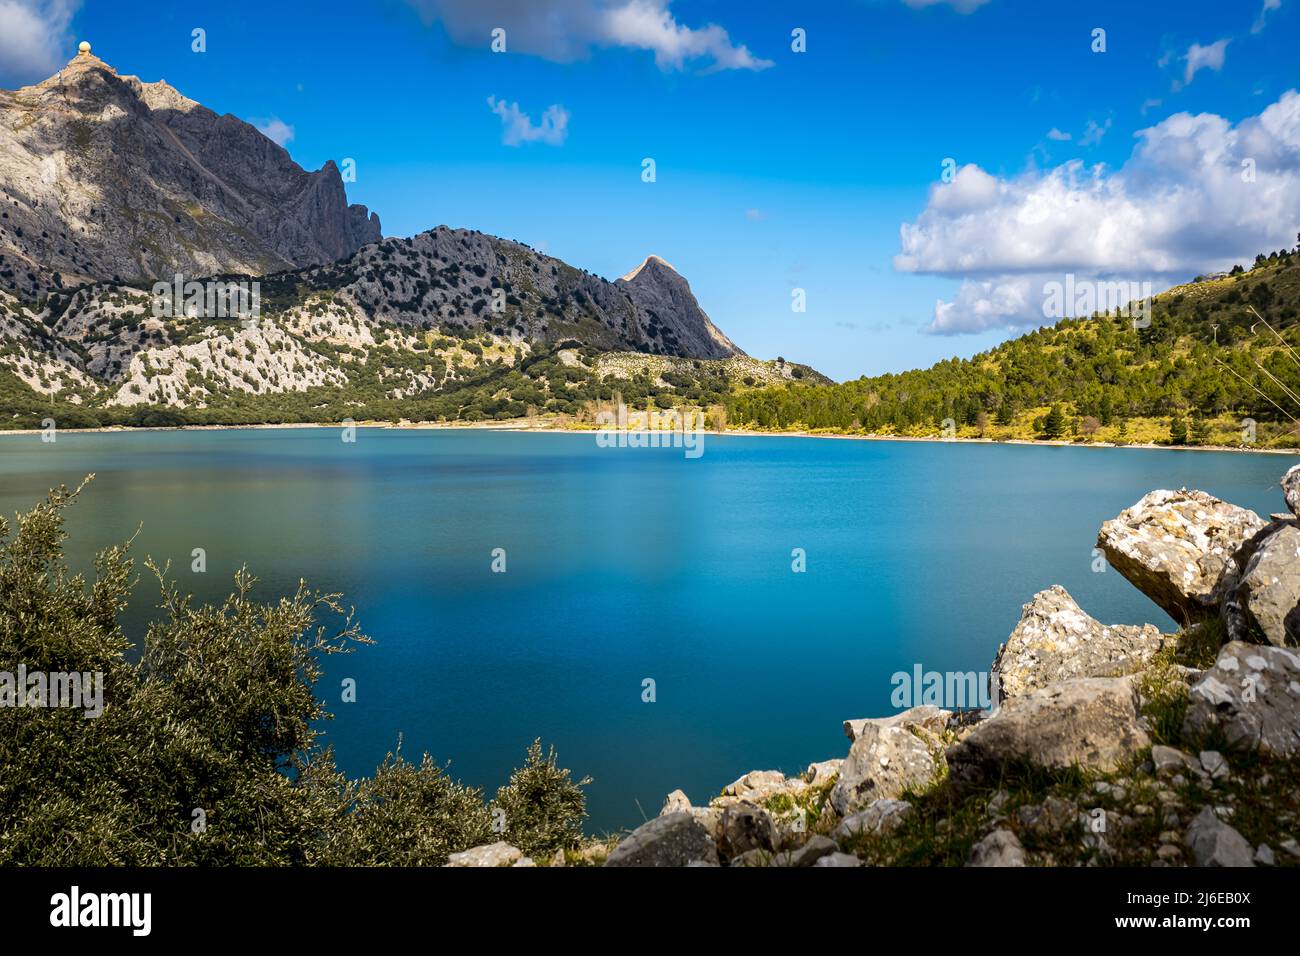 Artificial mountain lake at Mallorca with rocks and bush in the foreground and the mountains Puig Major and Es pa de Figa in the background. Stock Photo